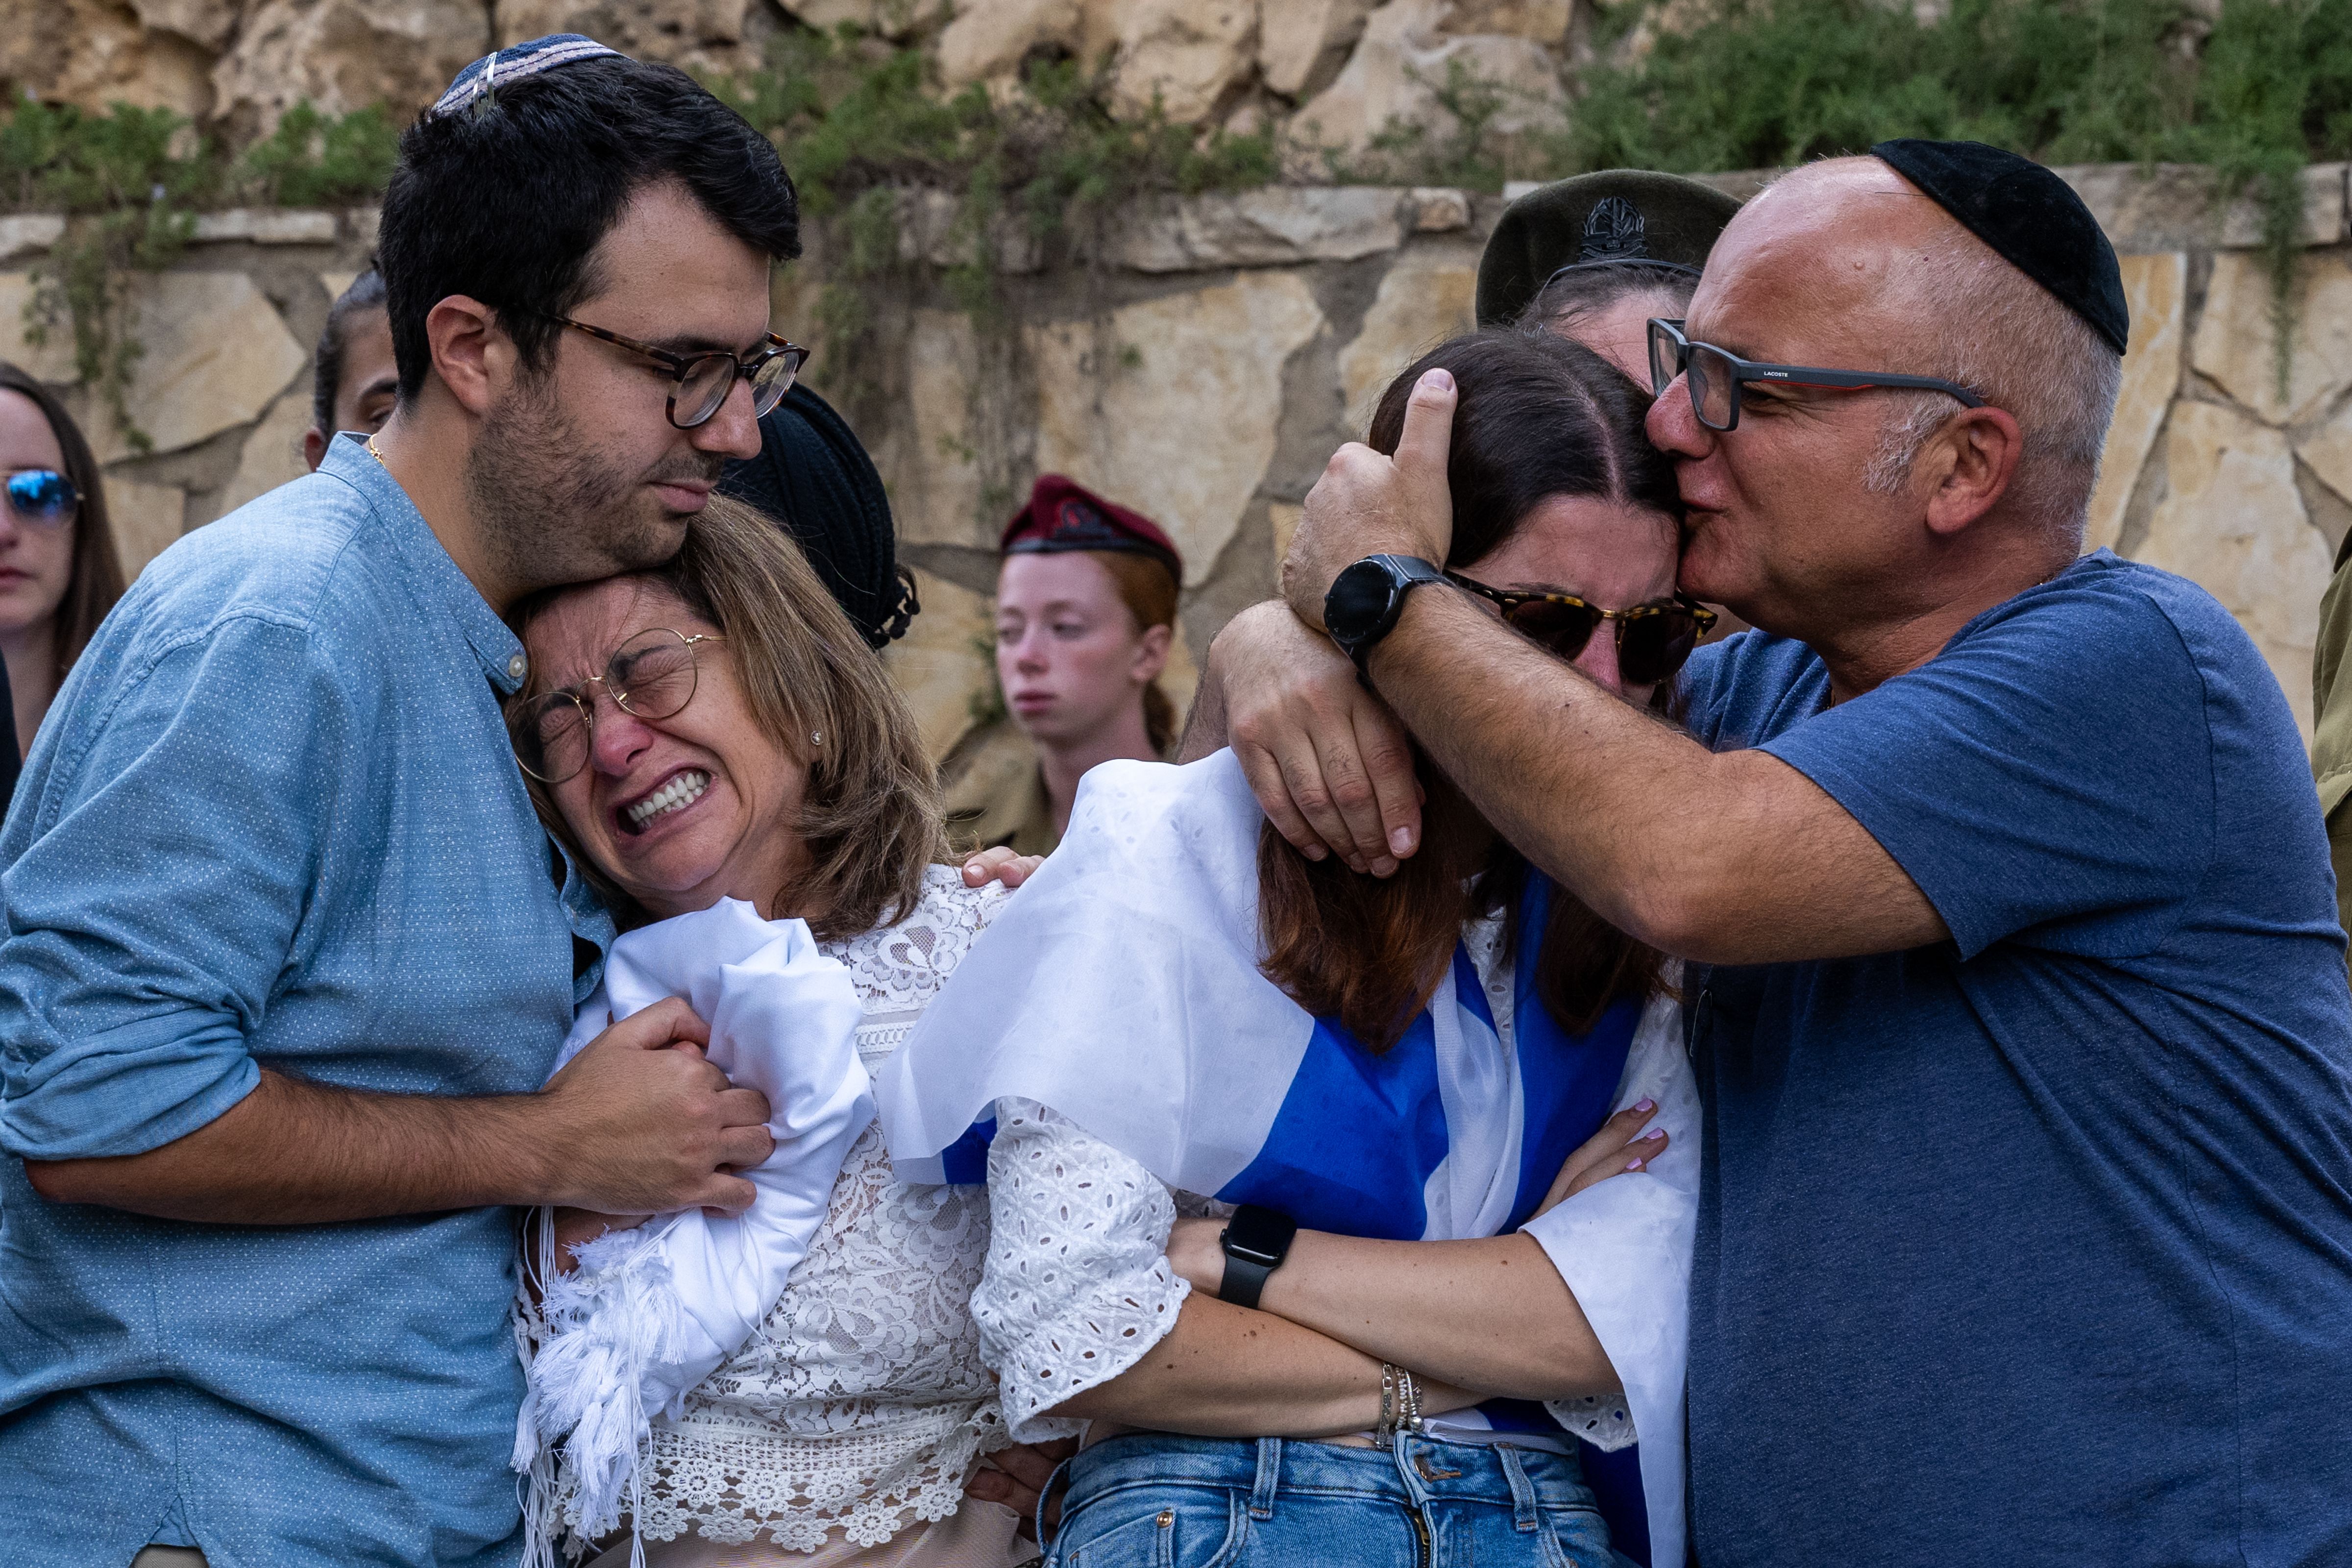 Family members of Valentin Ghnassia react during his funeral ceremony at the Mount Herzl Military Cemetery in Jerusalem on October 12. Ghnassia was killed in a battle with Hamas militants in Be'eri, Israel.